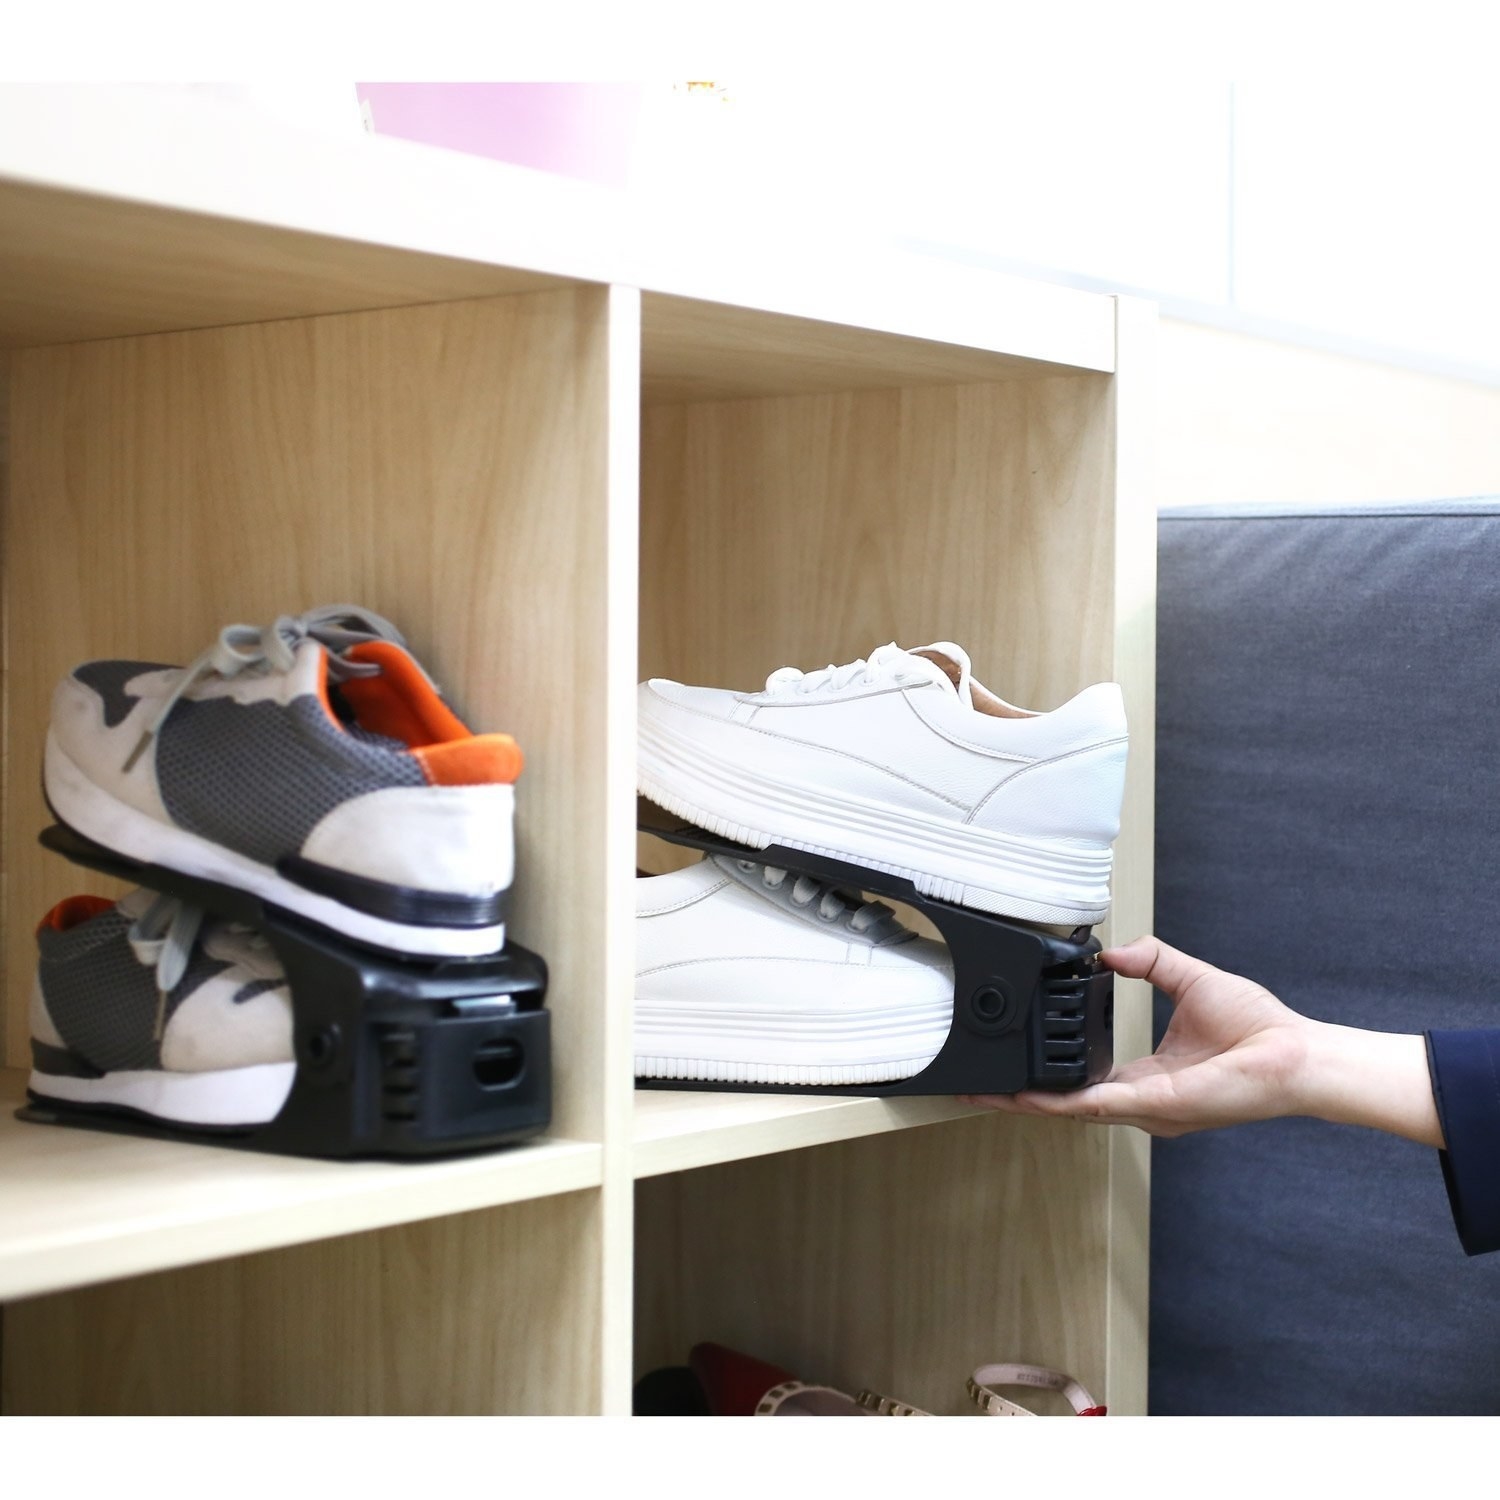 The shoe slots are designed to place one shoe on top of the other. Two pairs of shoes are neatly stored in a cubbyholes.